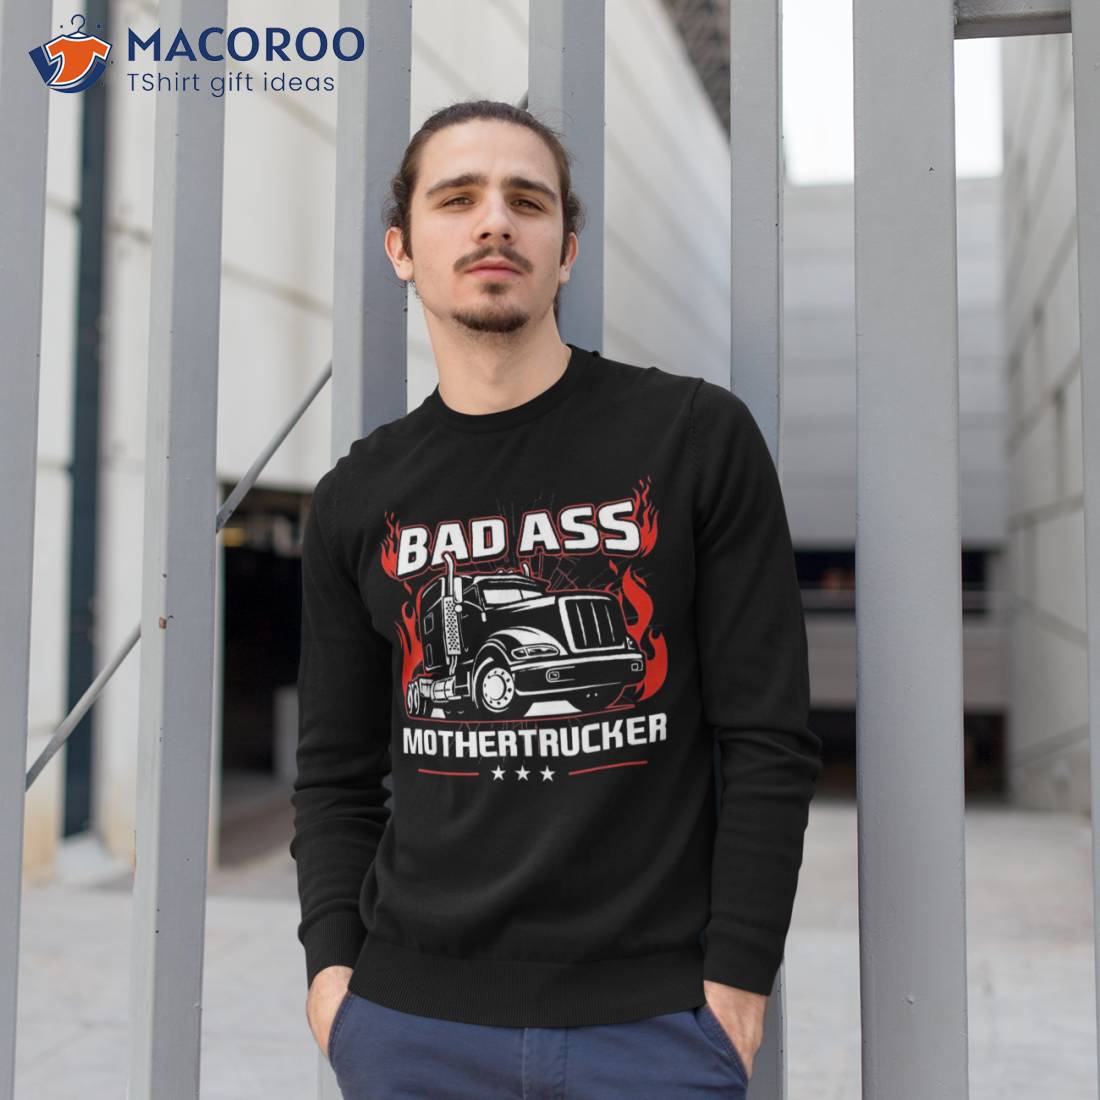 https://images.macoroo.com/wp-content/uploads/2023/06/bad-ass-mother-trucker-truck-driving-gift-for-father-s-day-shirt-sweatshirt-1.jpg